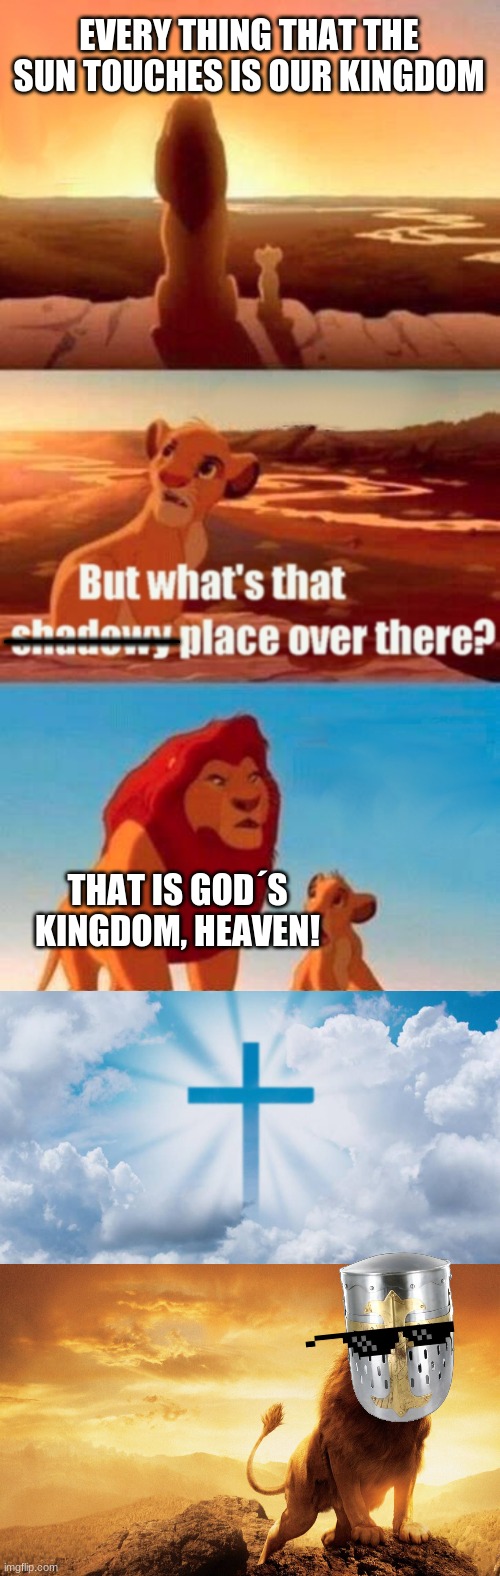 Another kingdom | EVERY THING THAT THE SUN TOUCHES IS OUR KINGDOM; _______; THAT IS GOD´S KINGDOM, HEAVEN! | image tagged in memes,simba shadowy place,christianity | made w/ Imgflip meme maker